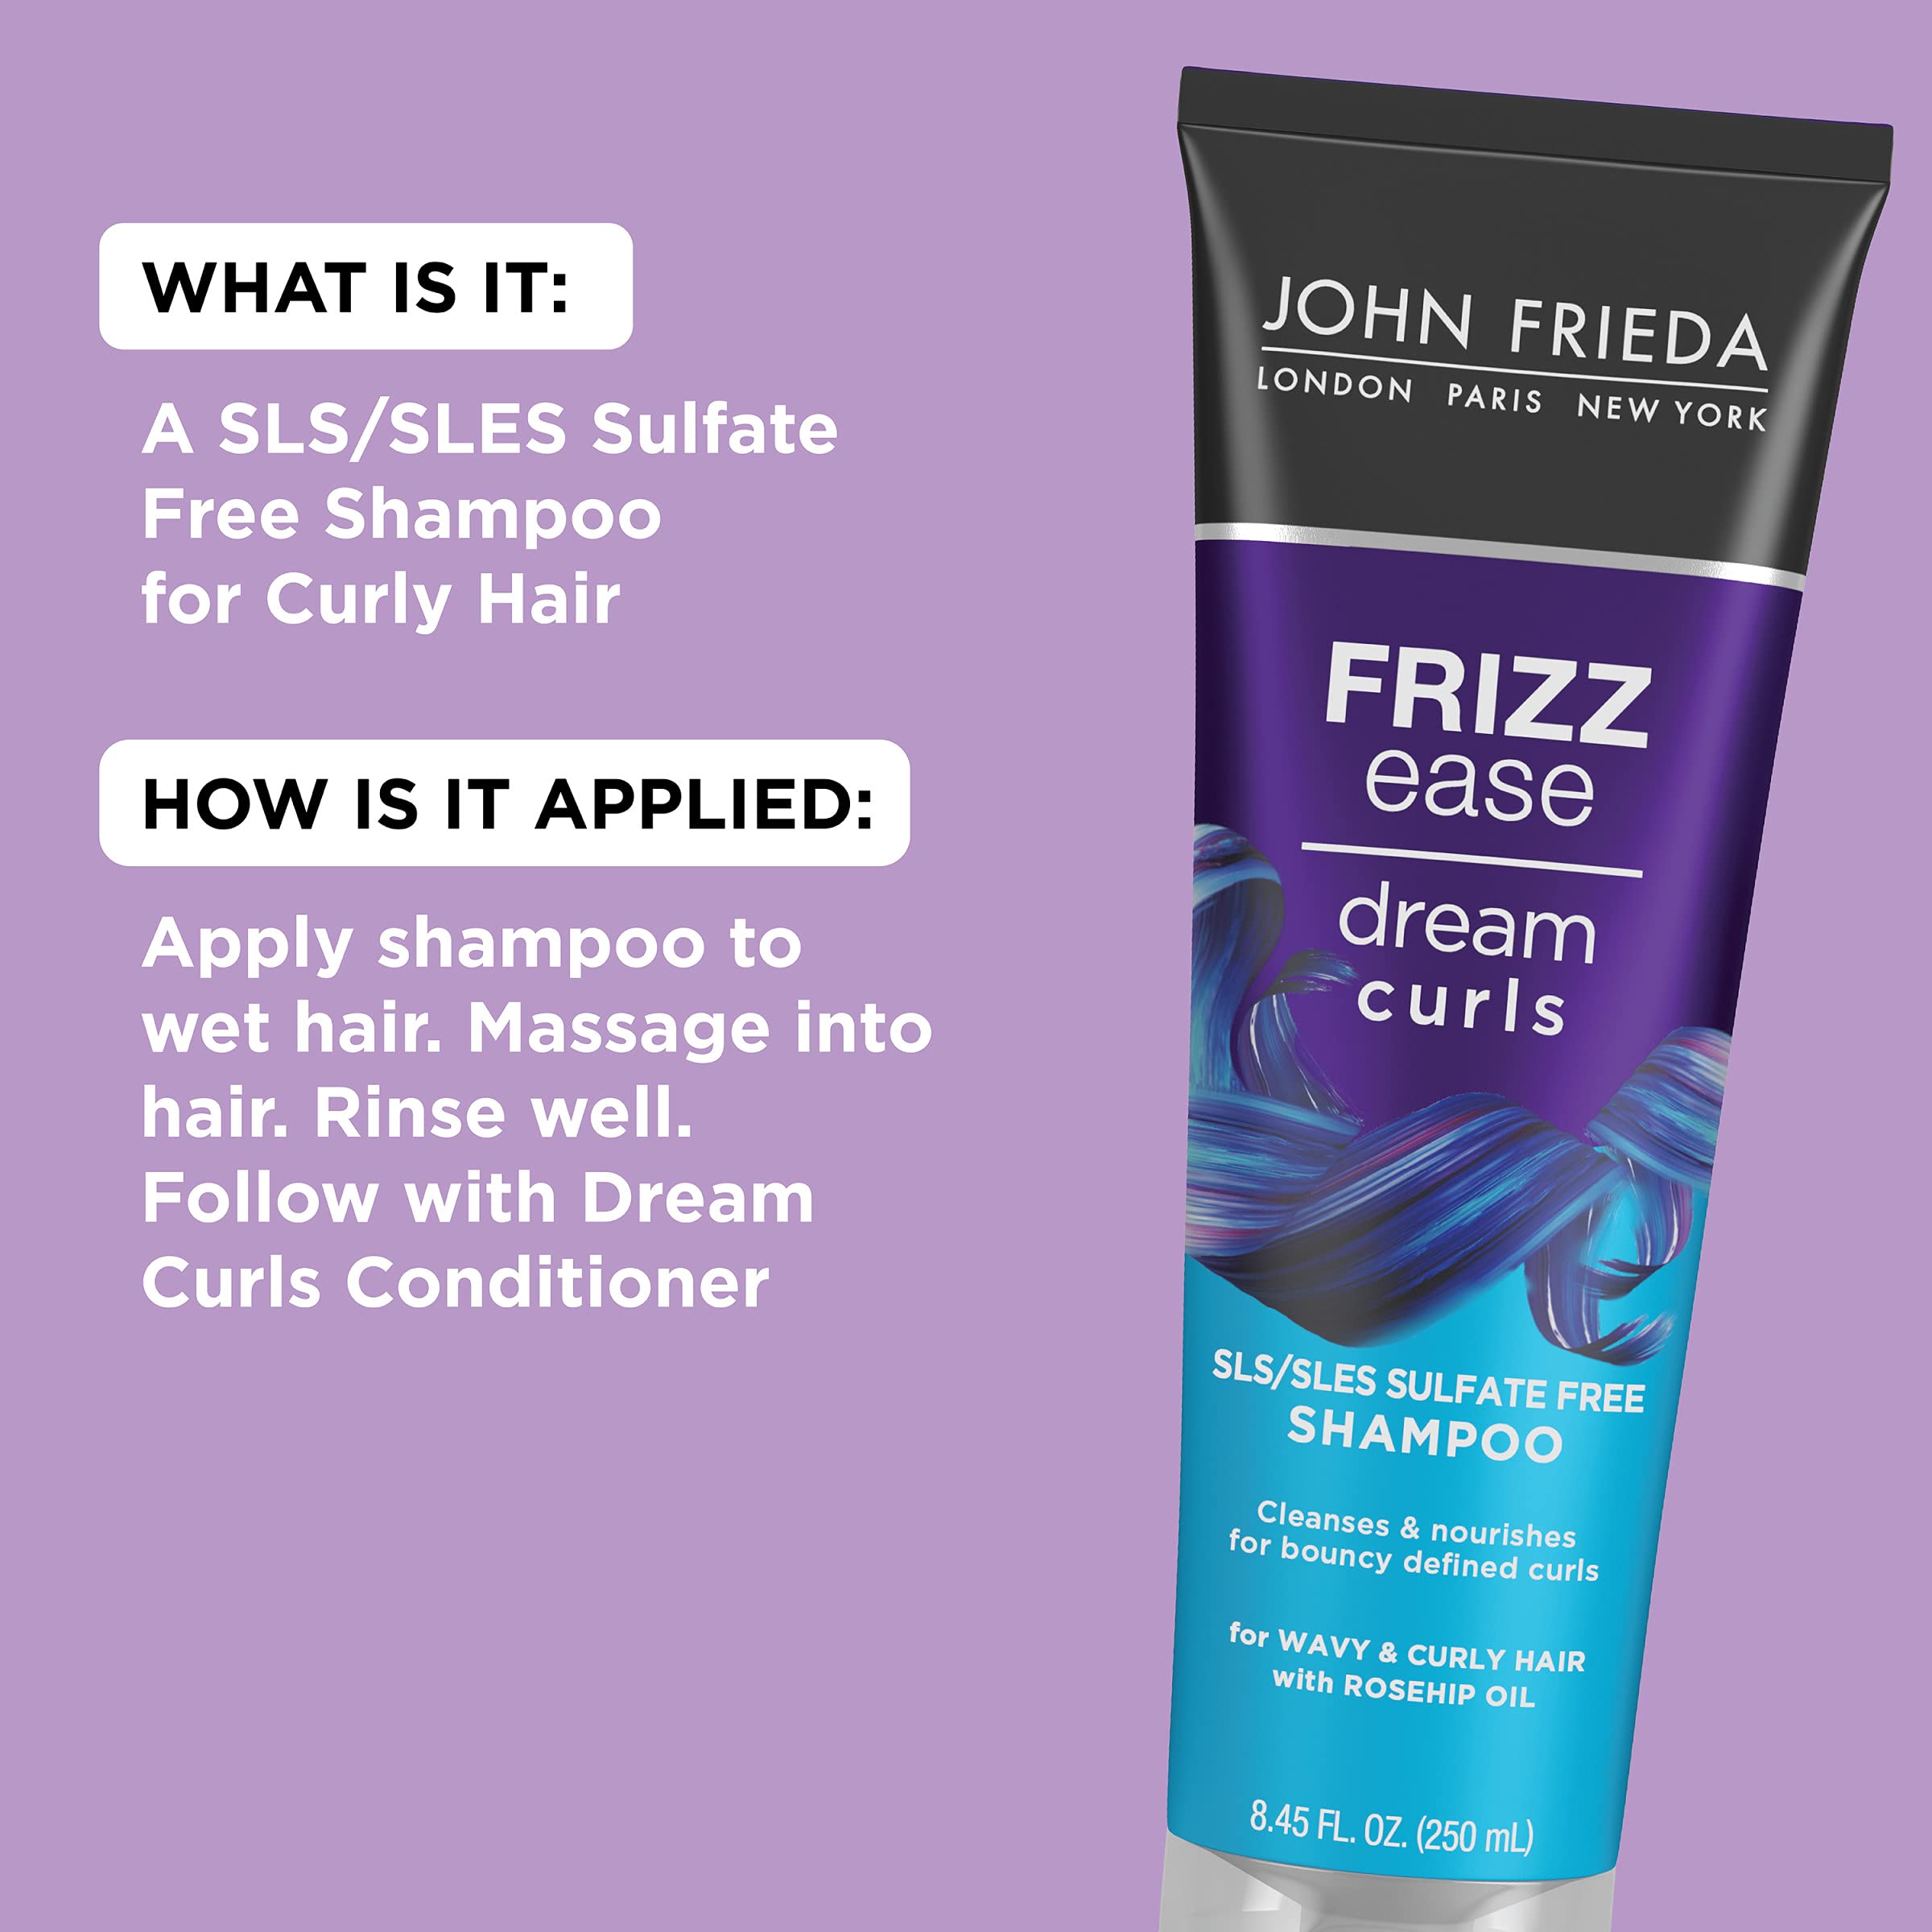 John Frieda Frizz Ease Dream Curls Curly Hair Shampoo, SLS/SLES Sulfate Free, Helps Control Frizz, with Curl Enhancing Technology, 8.45 Fluid Ounces (Pack of 2)